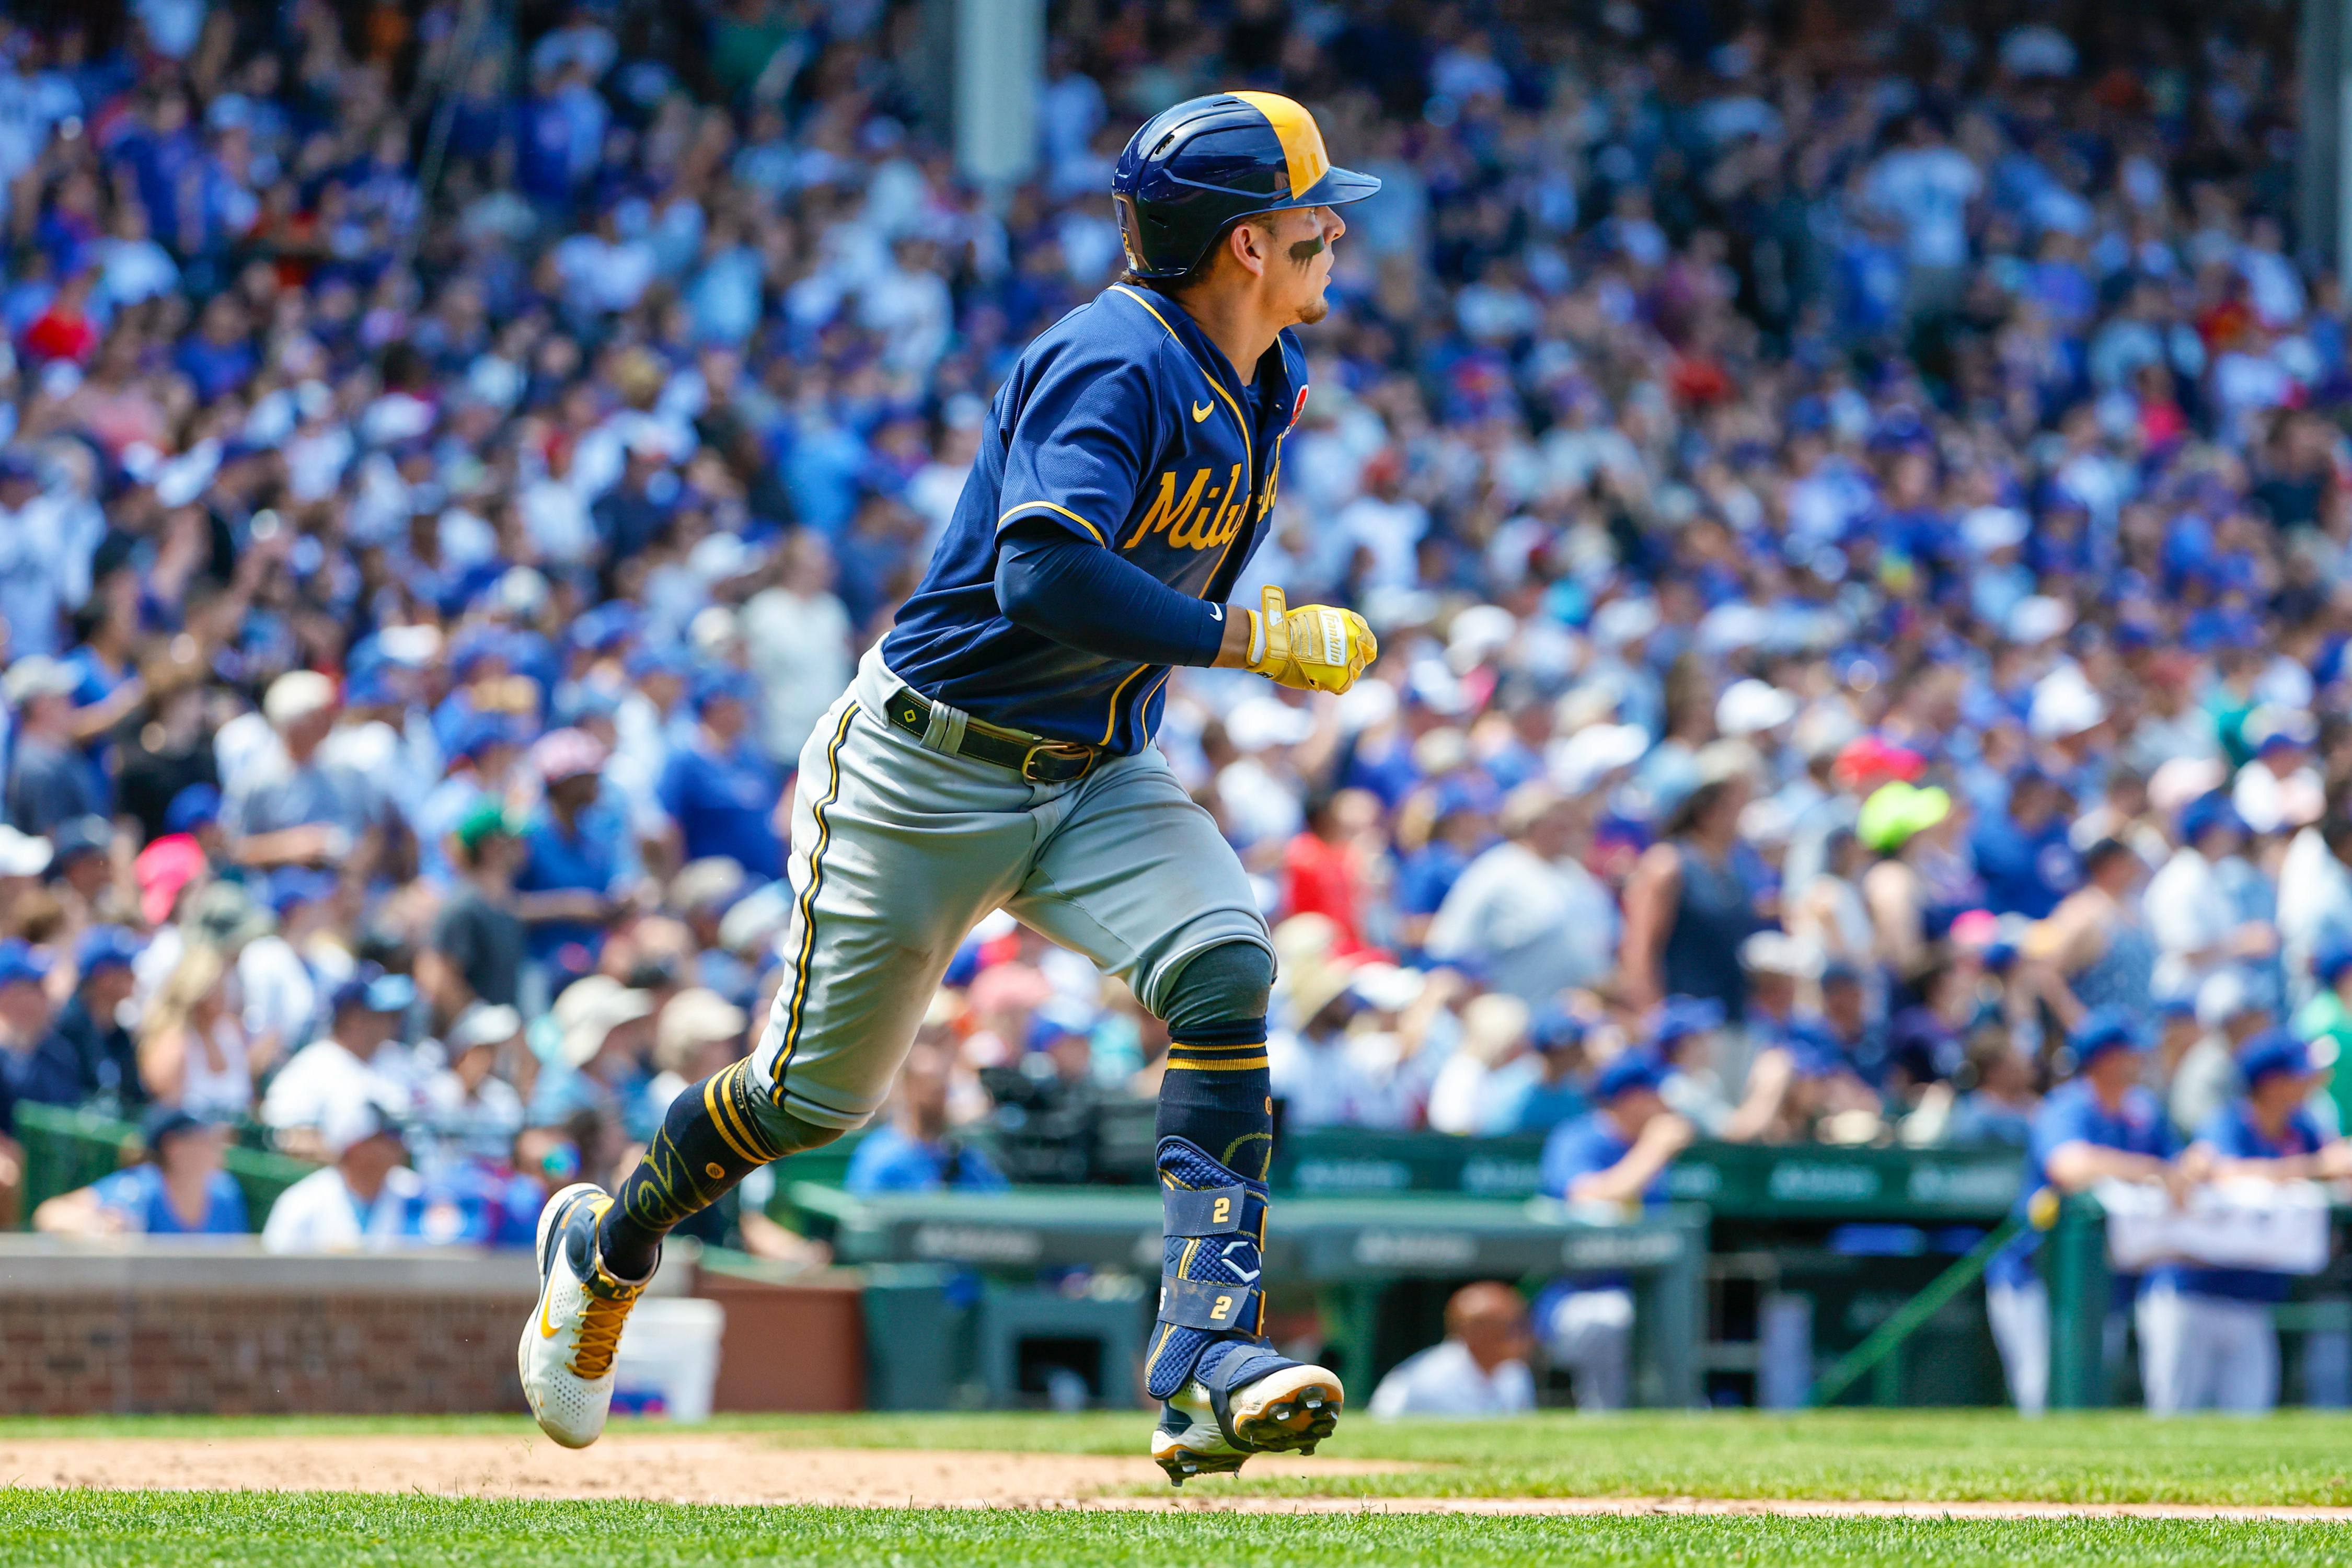 Brewers complete doubleheader sweep of Cubs